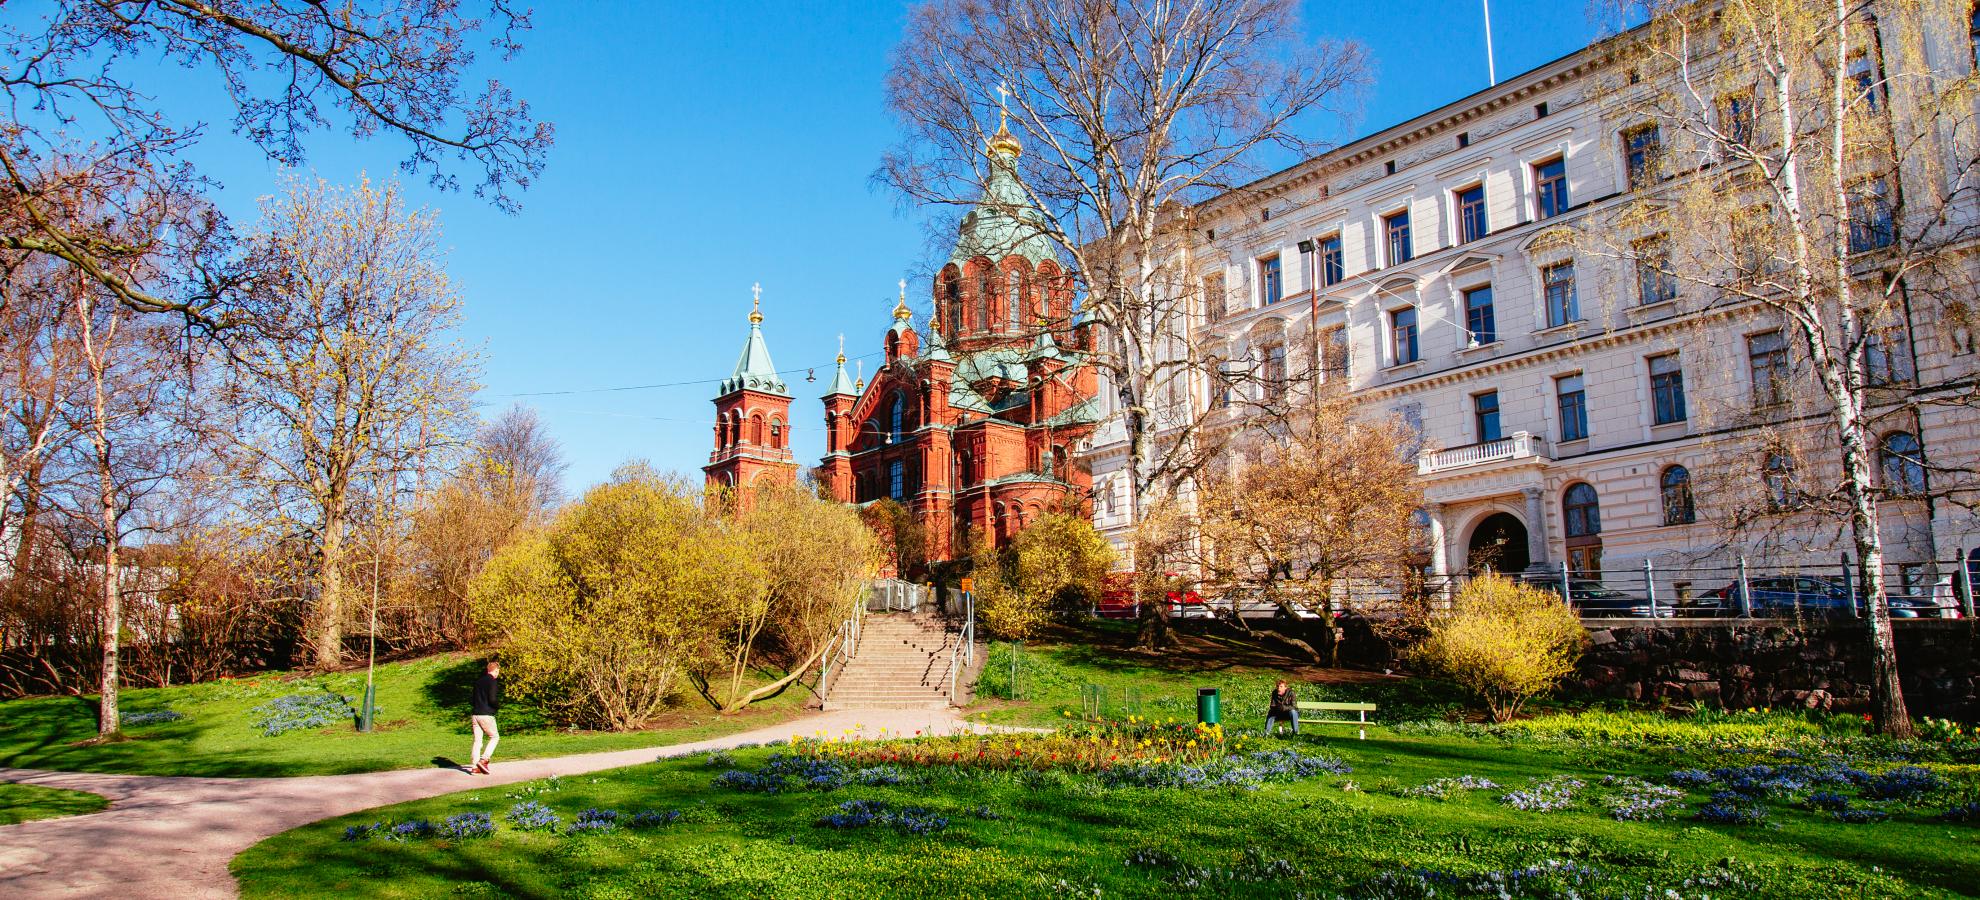 A view from Tove Jansson park looking towards the Uspenski Cathedral, art nouveau style apartments on the right. It's a clear day with a blue sky in autumn.  